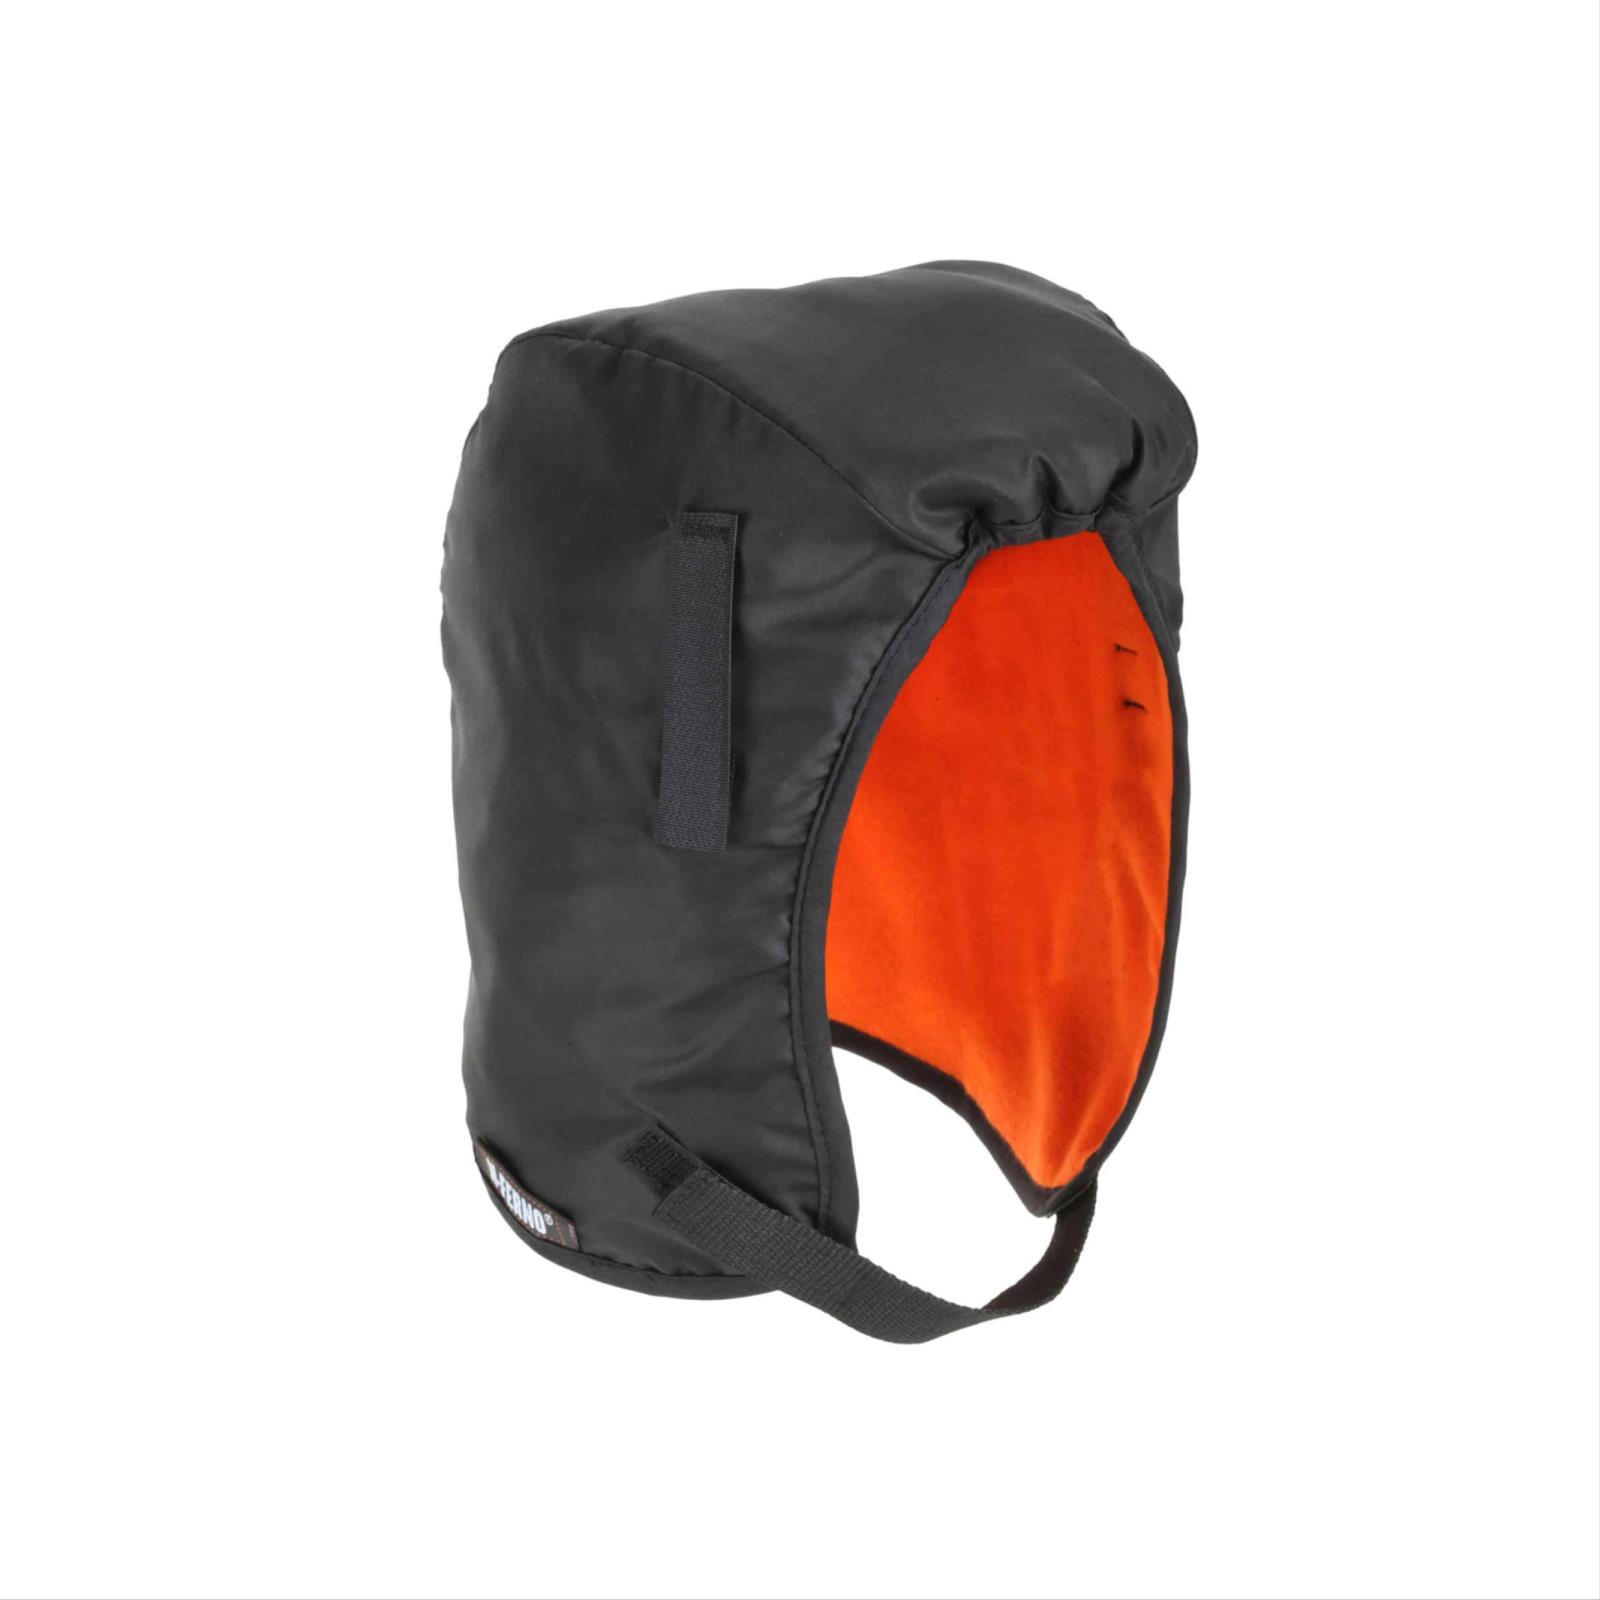 N-Ferno® Winter Hard Hat Liners